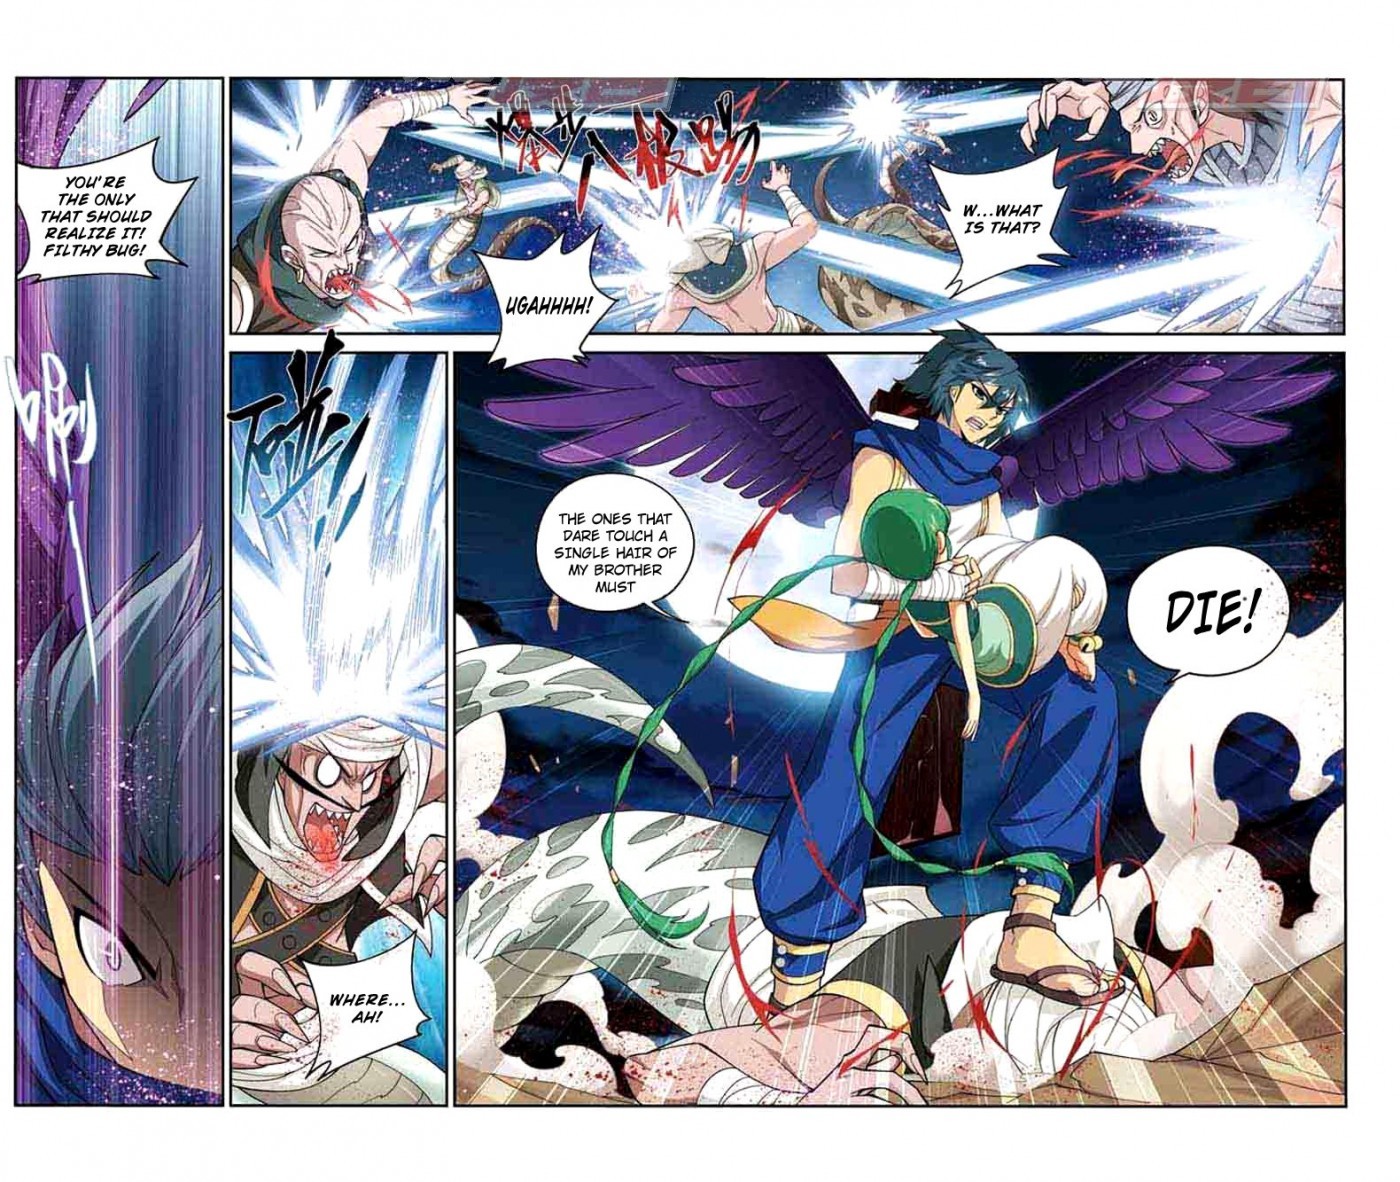 Fights Breaking Through The Heavens vol.8 ch.41